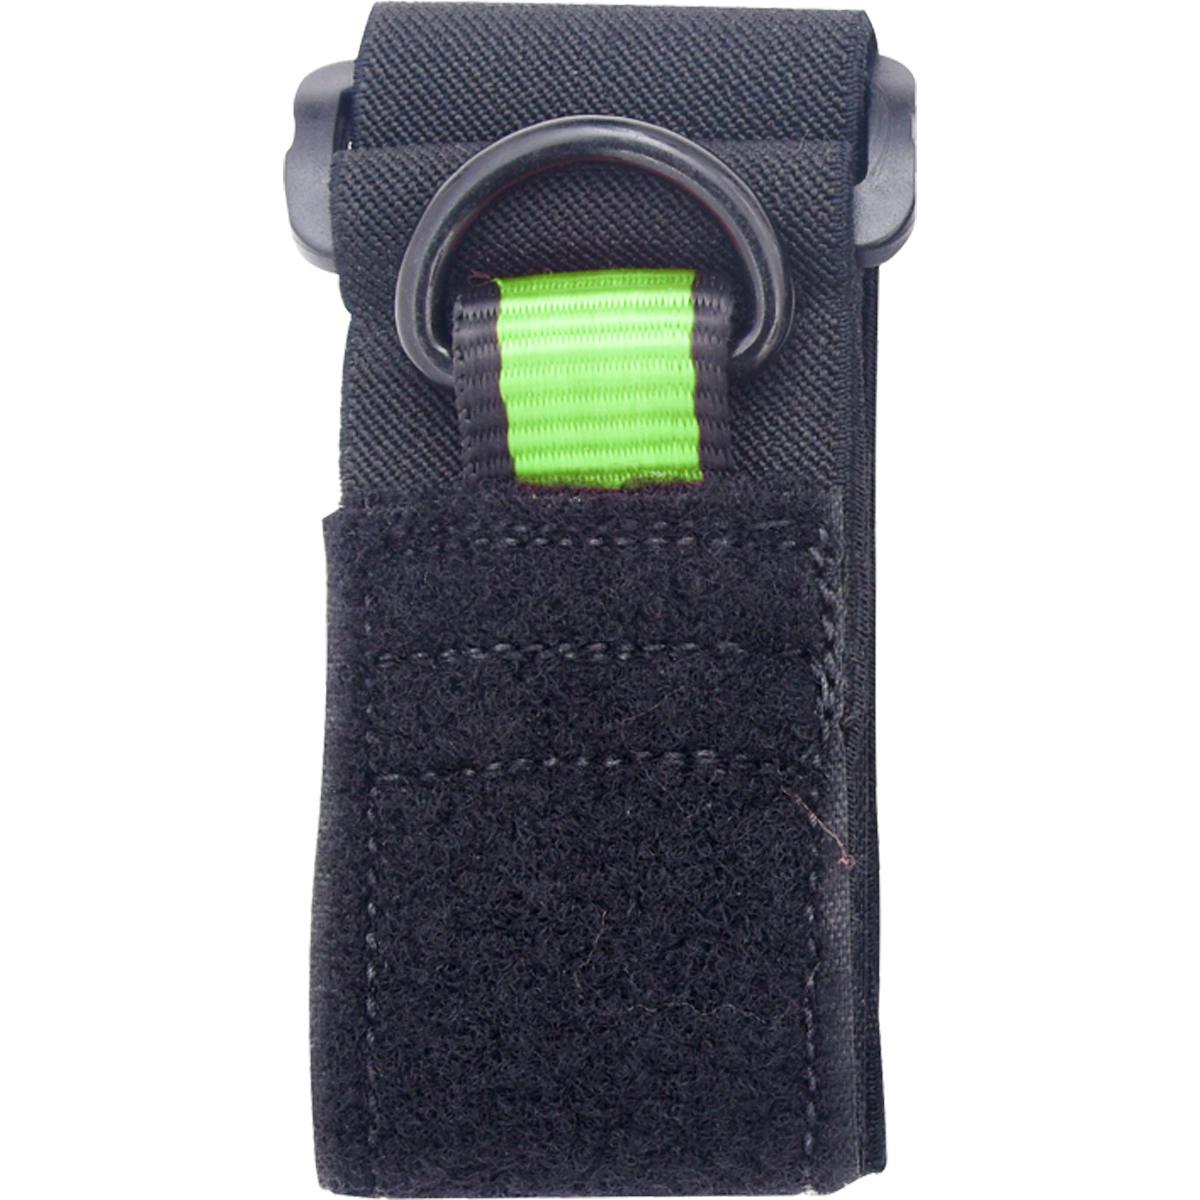 Wristband Tool Holder - 2 lbs. maximum load limit - Retail Packaged, Lime (533-300401) - OS_1